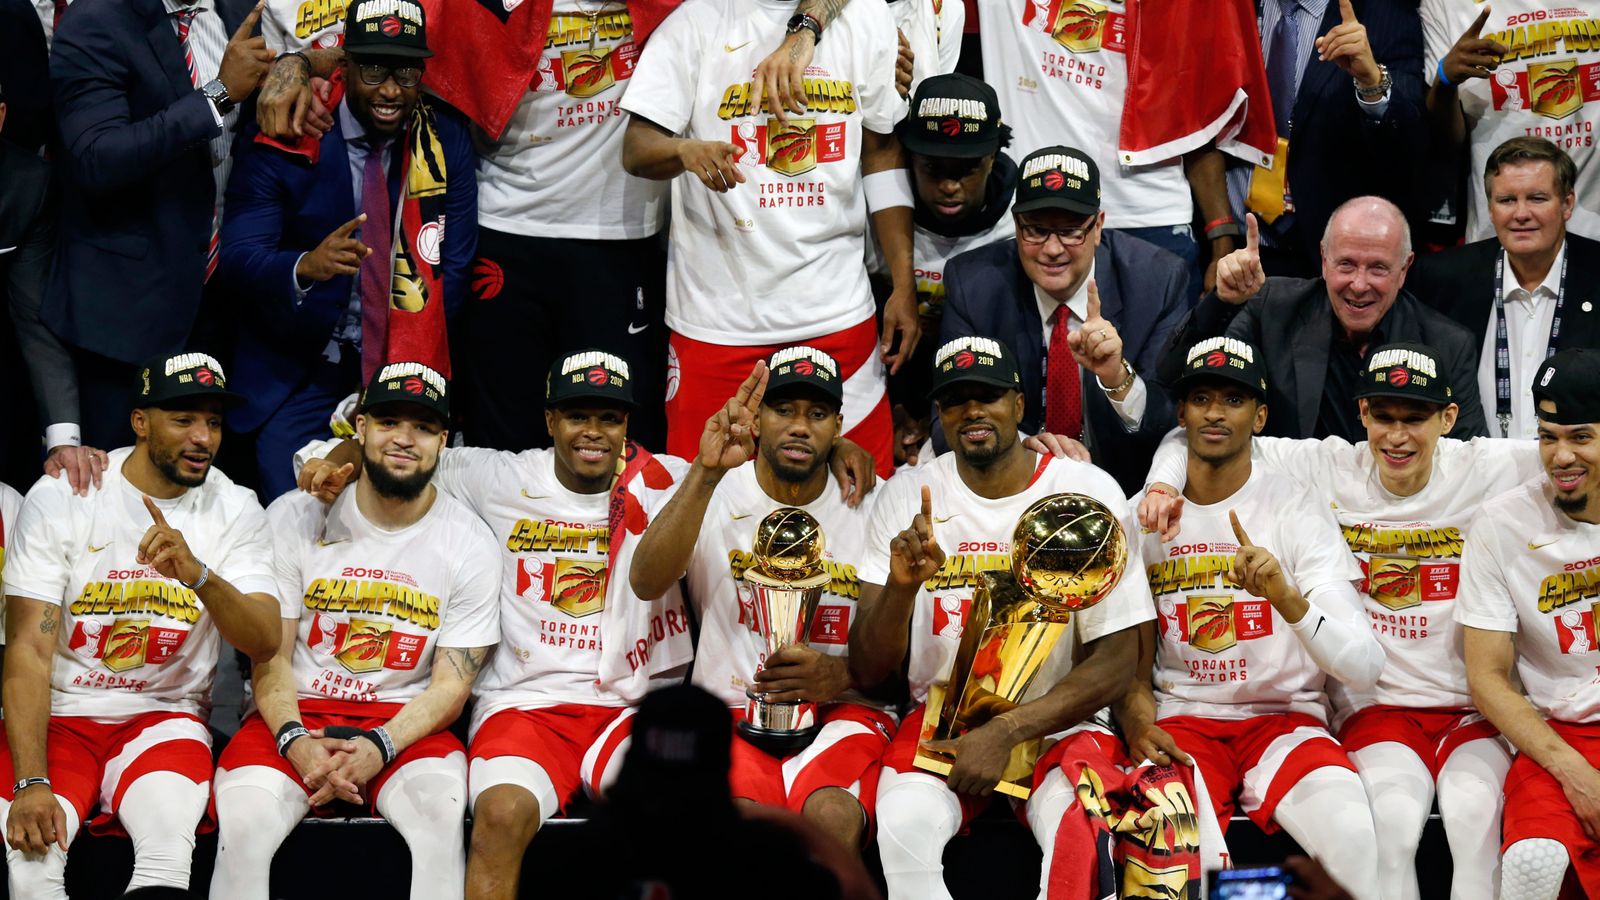 Toronto Raptors win maiden NBA championship with Game 6 victory over